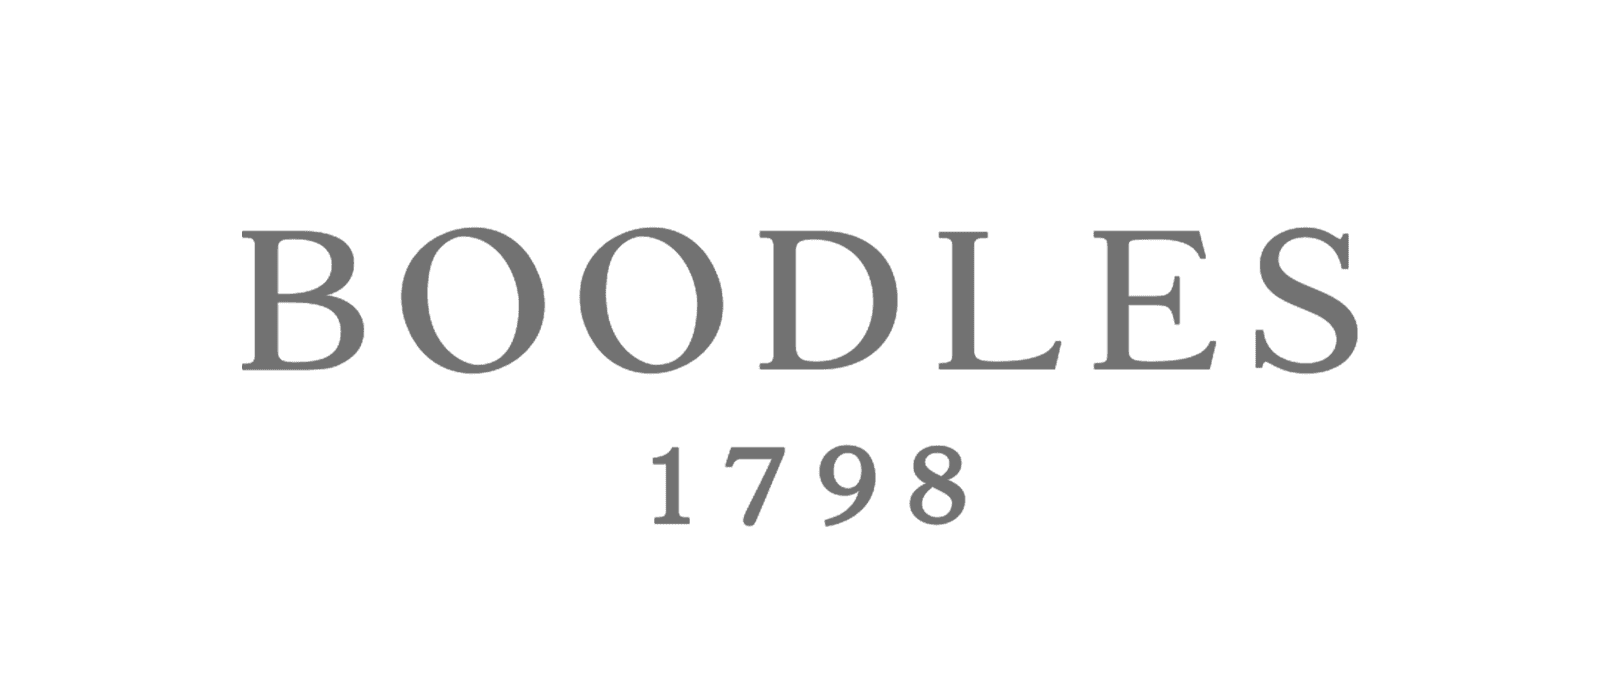 Loans against Boodles Jewellery